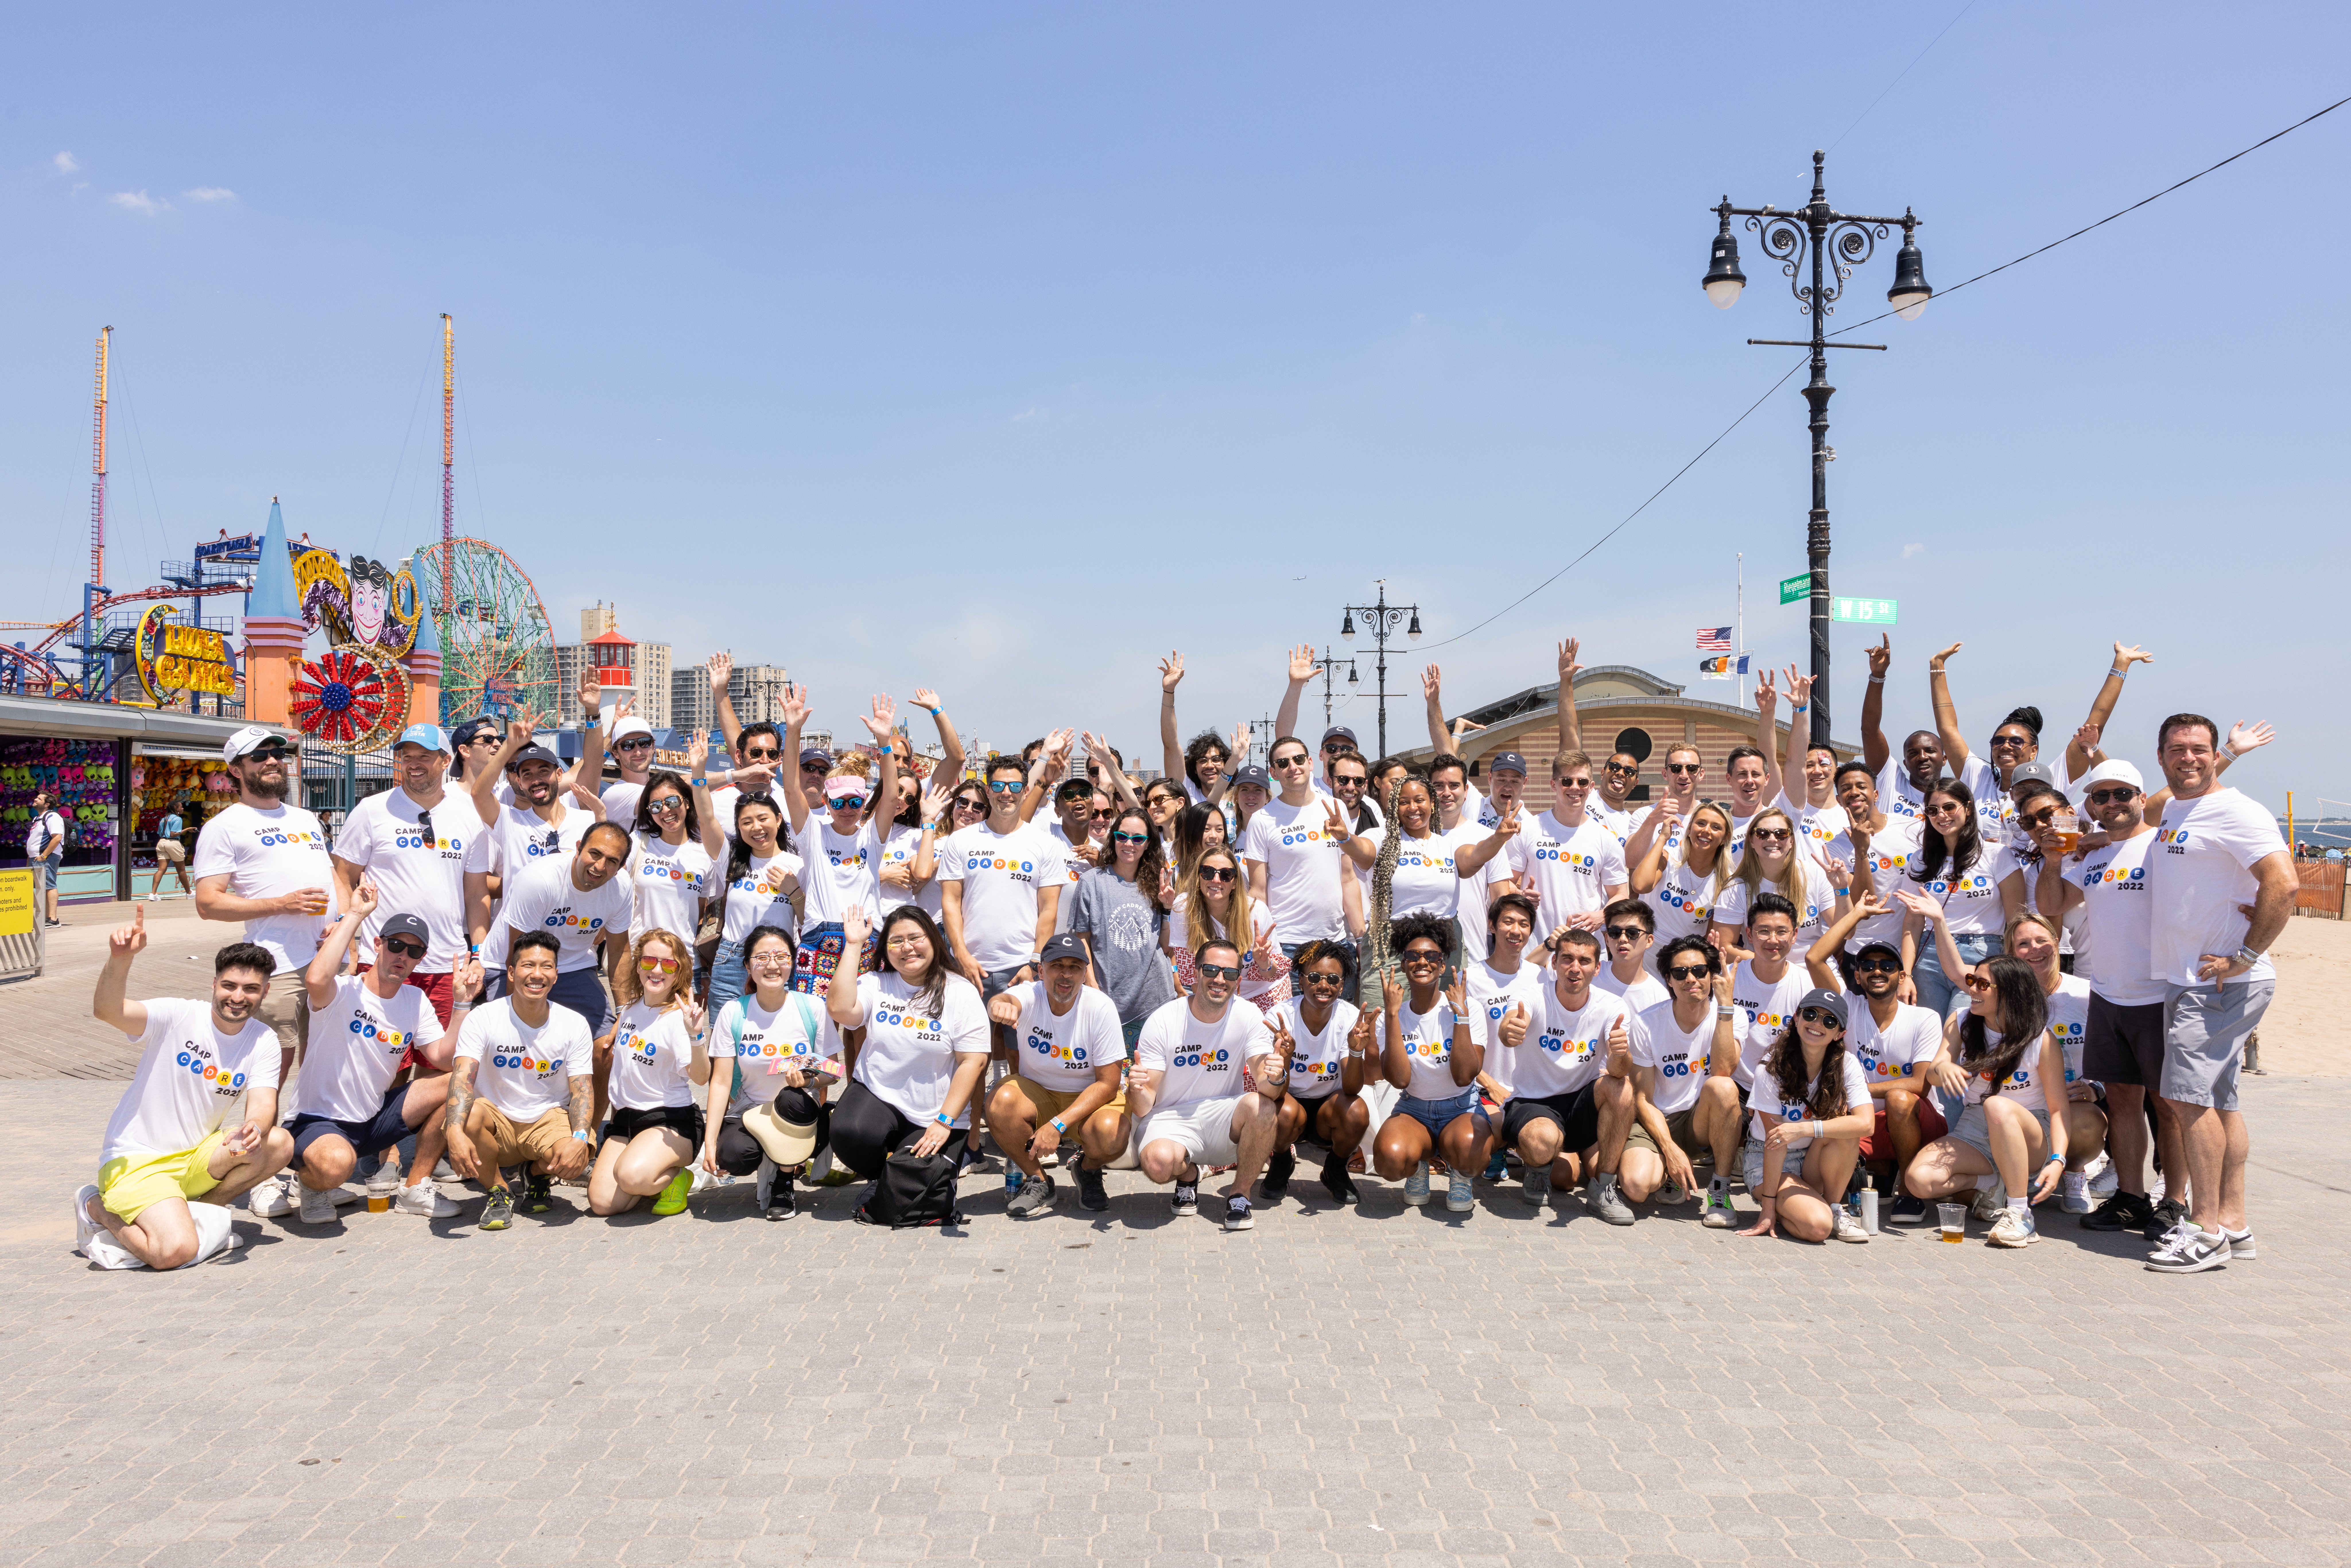 Cadre employees in a group photo at an amusement park. 